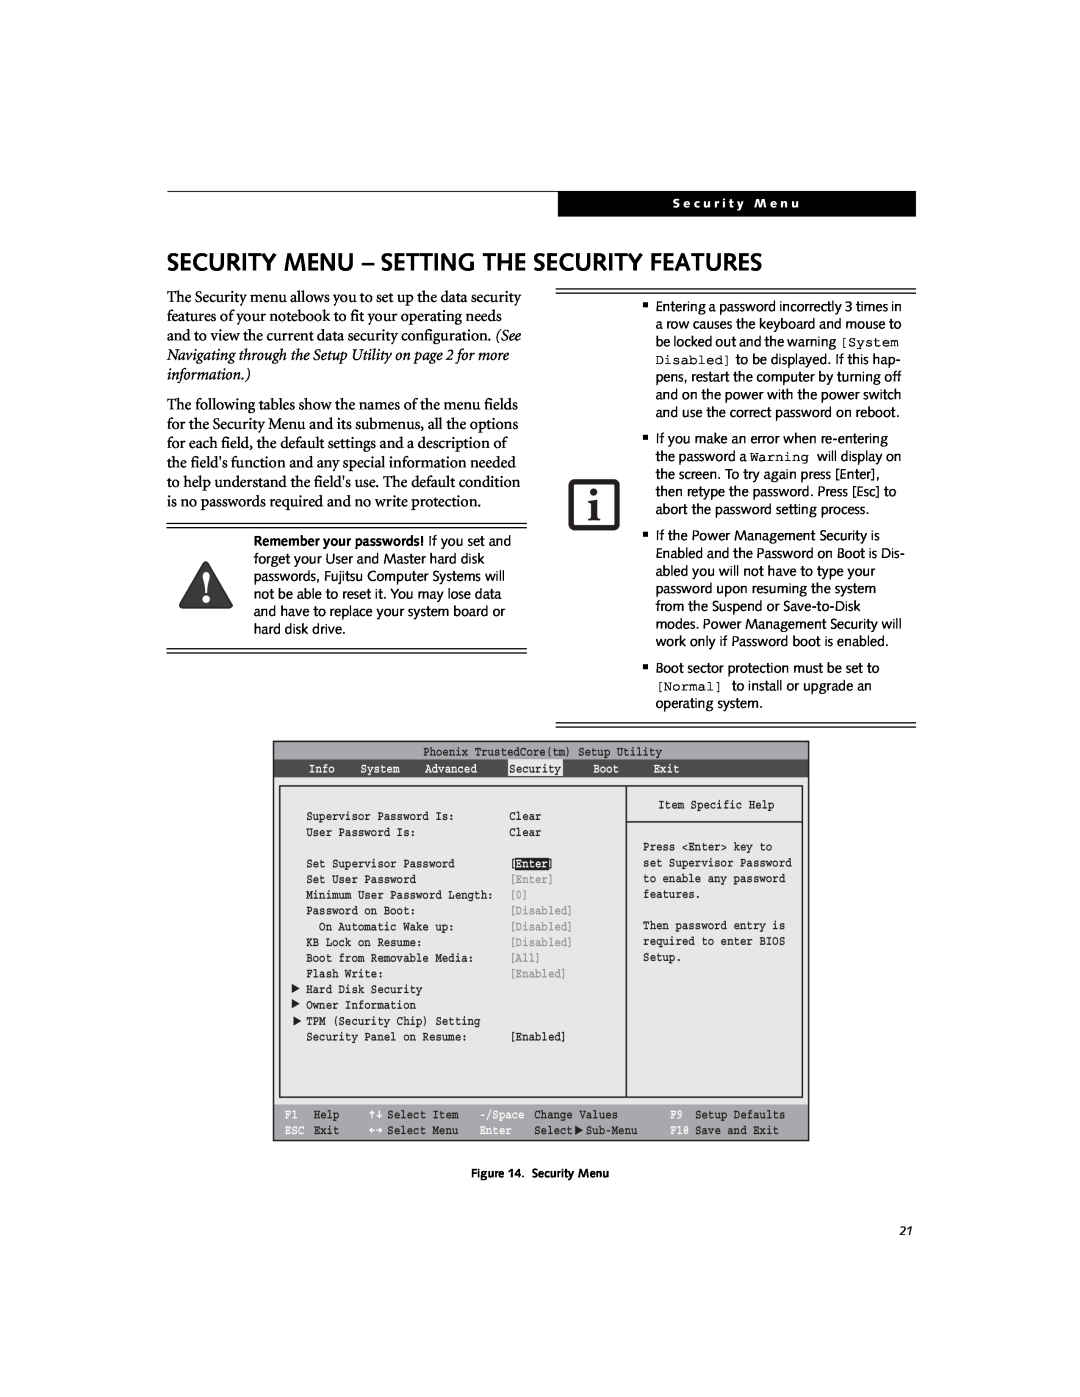 Fujitsu Siemens Computers E8310 manual Security Menu - Setting The Security Features, Disabled 